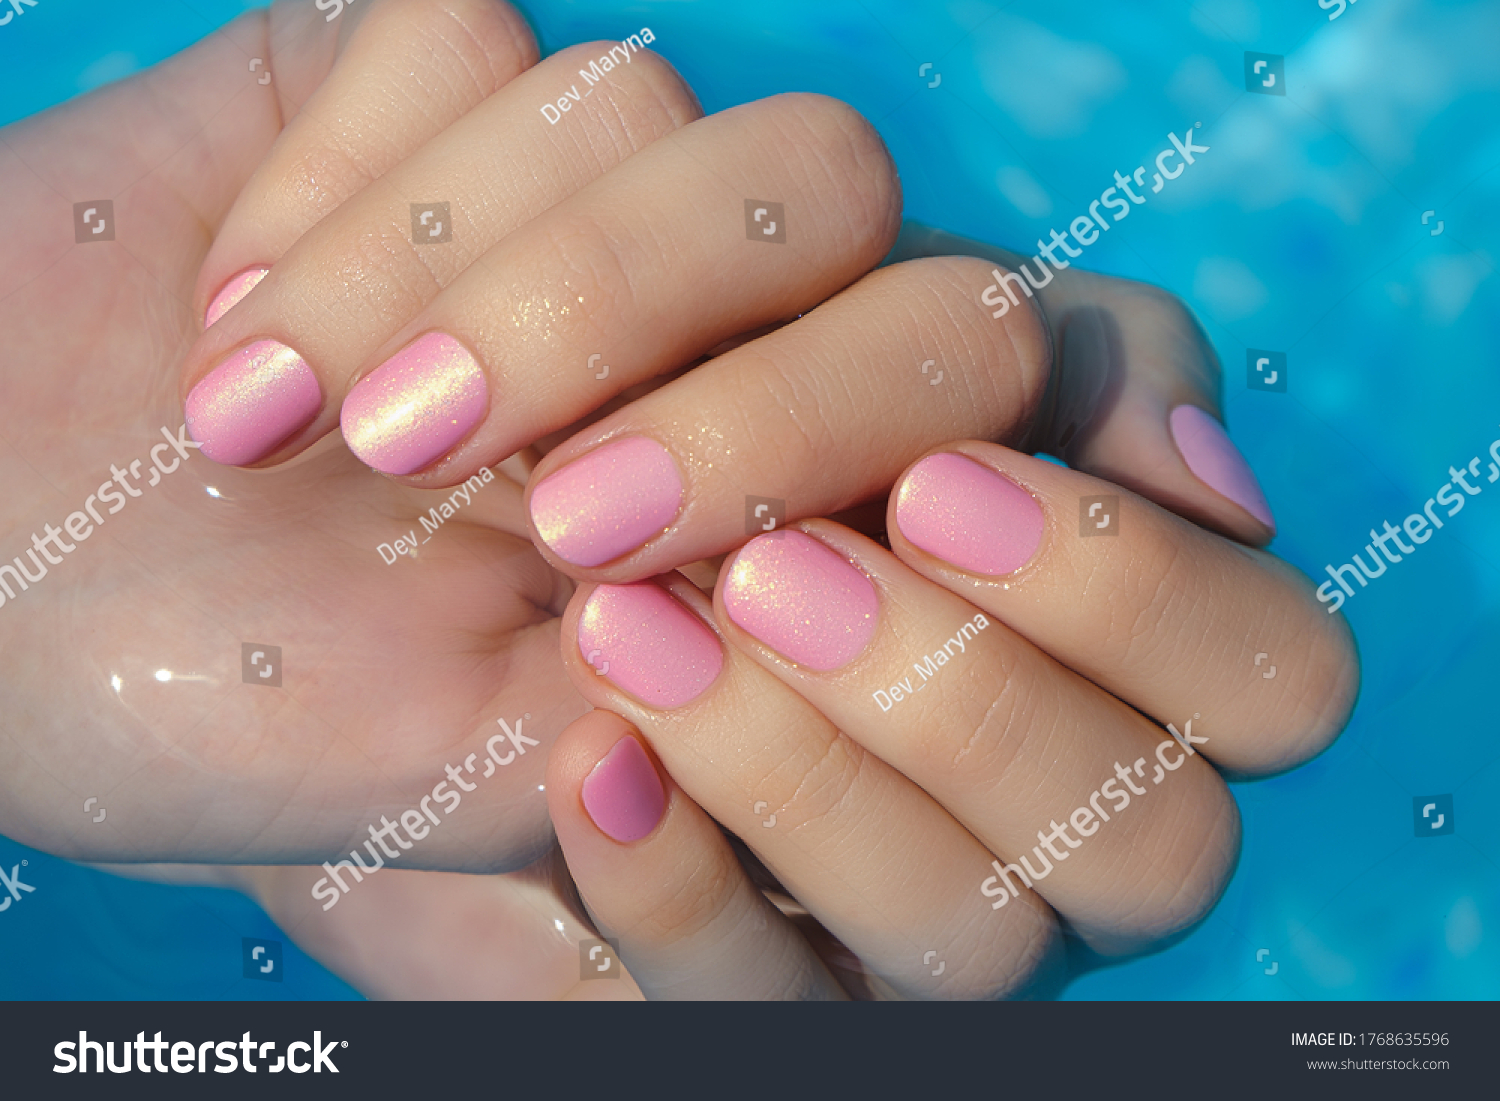 3. 3D Figures Nail Design in Purple and Pink - wide 4